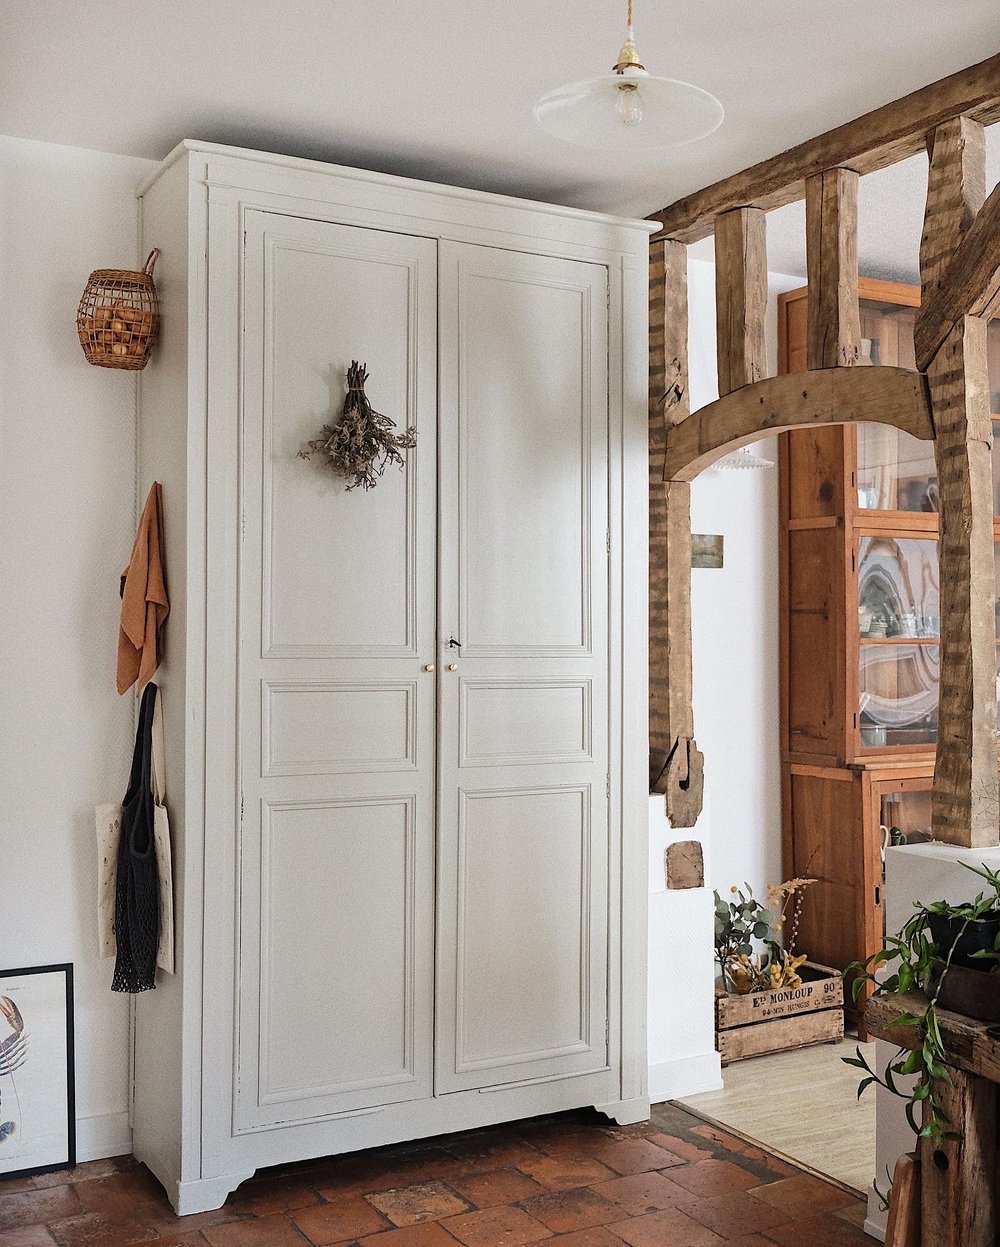 Tour This Charming French Country Home in the Loire Valley